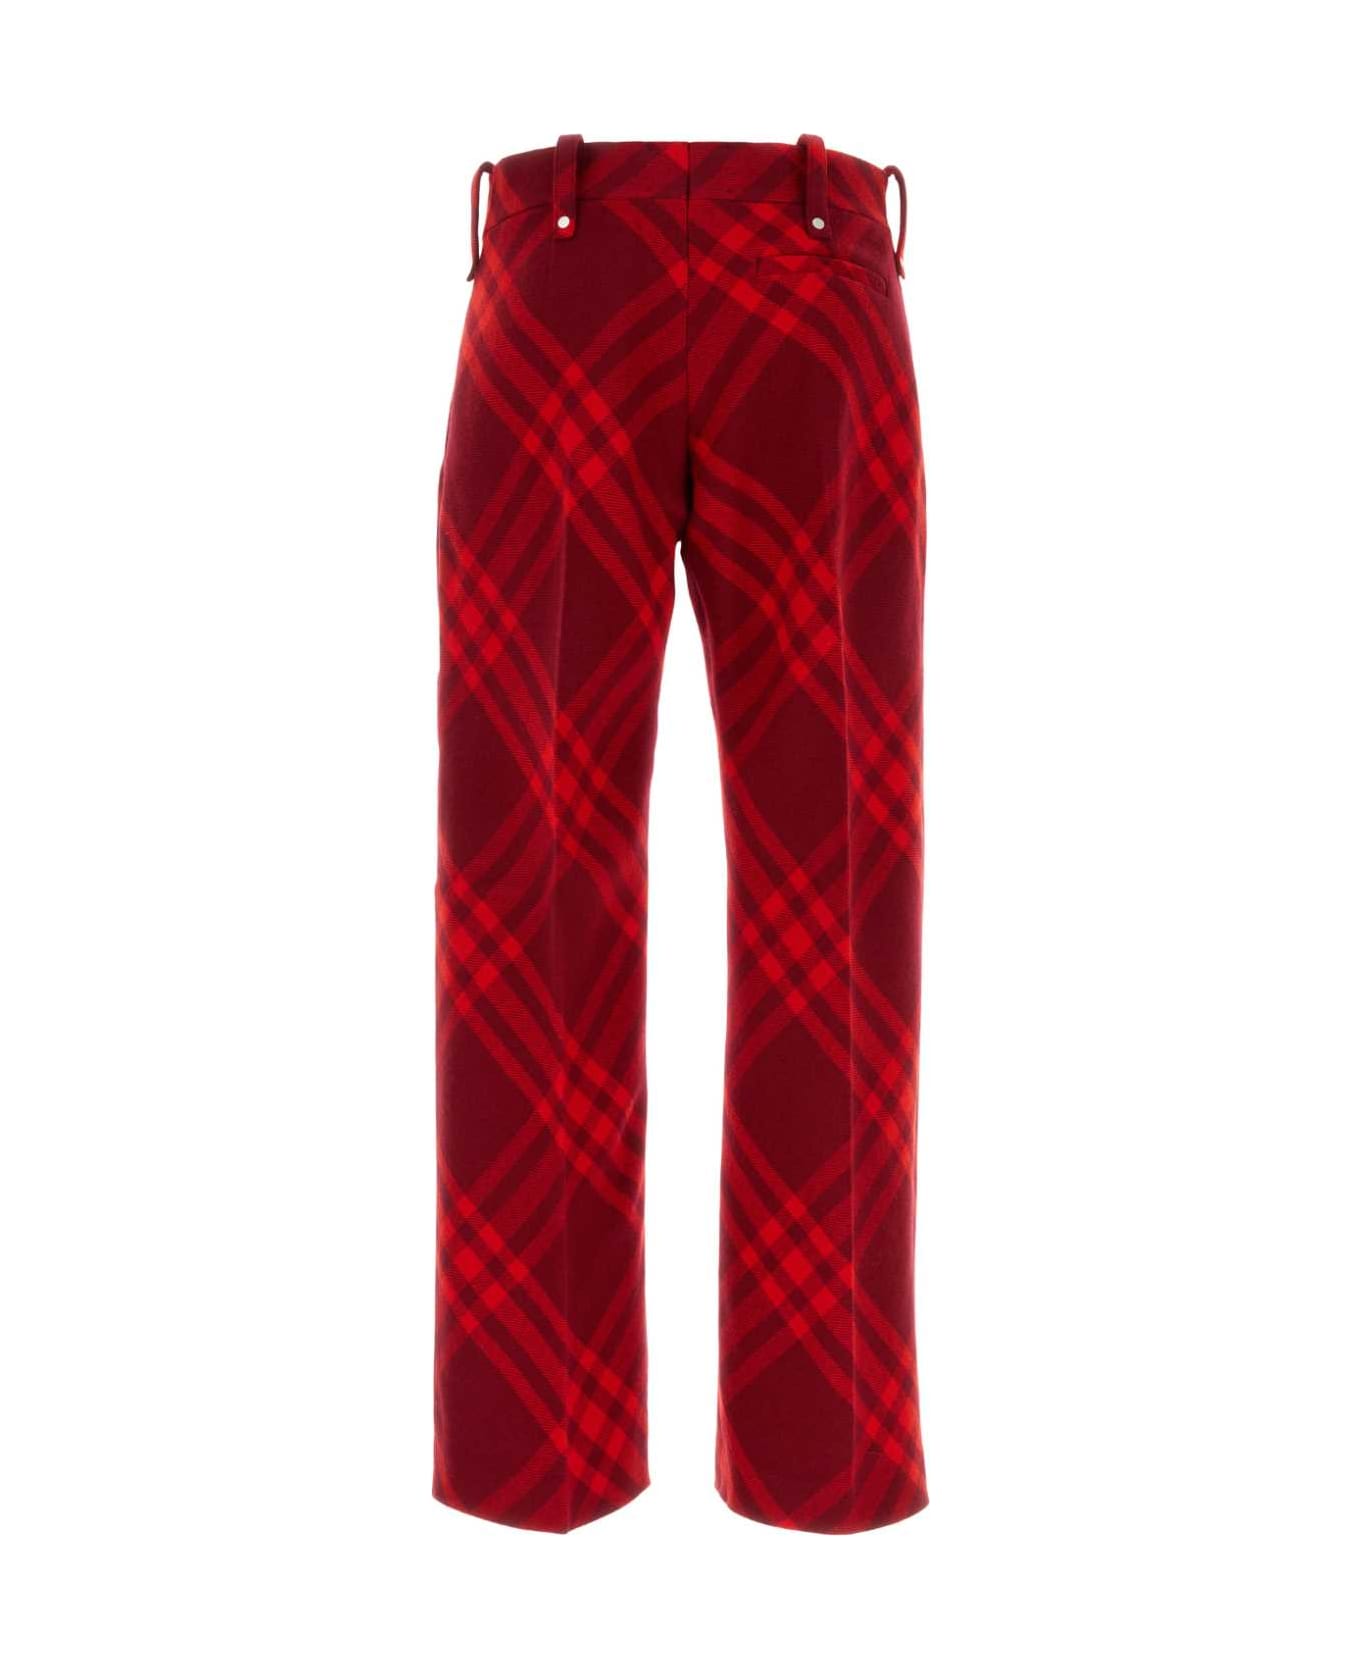 Burberry Embroidered Wool Pant - RIPPLE ボトムス